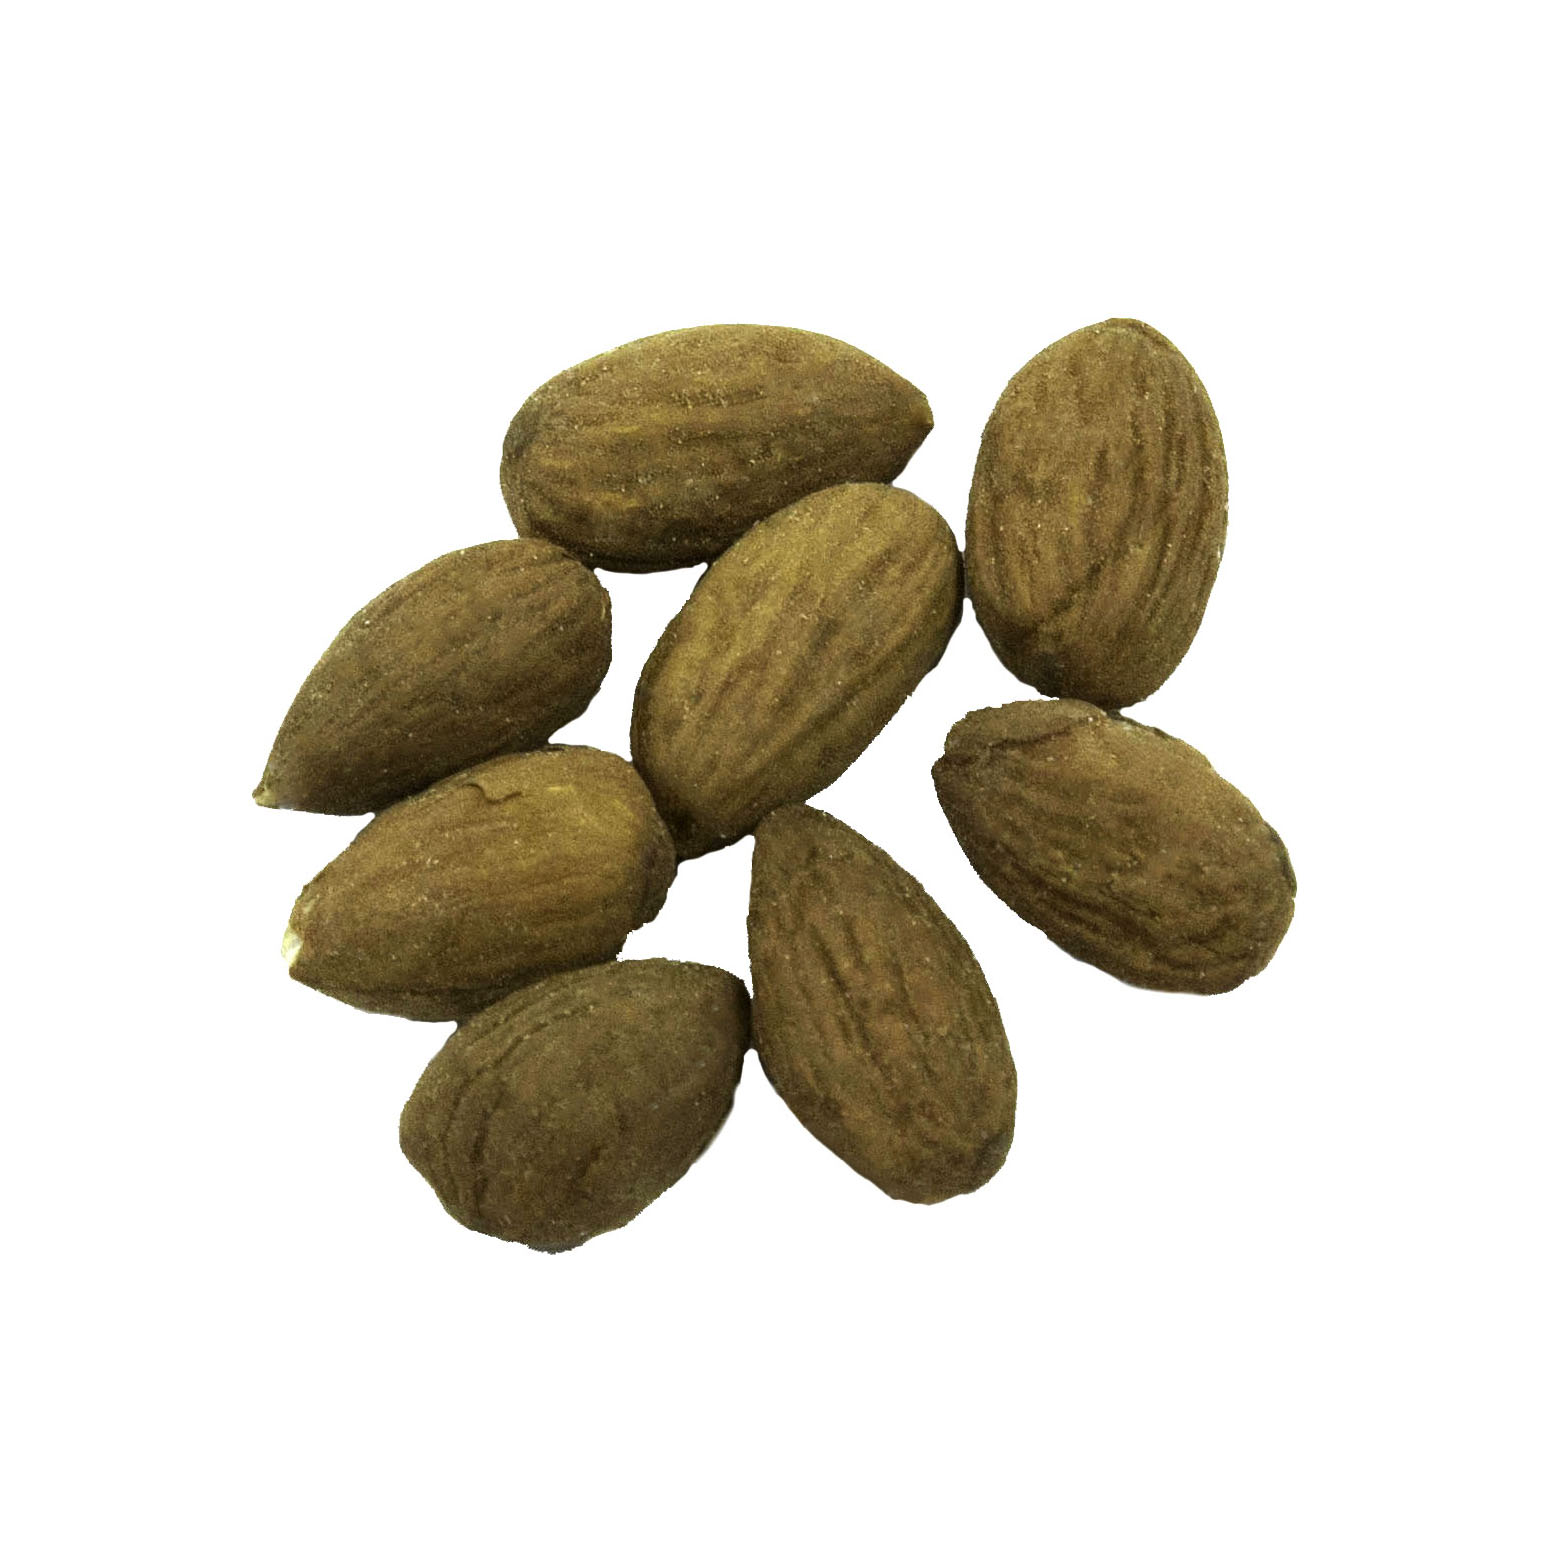 Roasted Unblanched Almonds